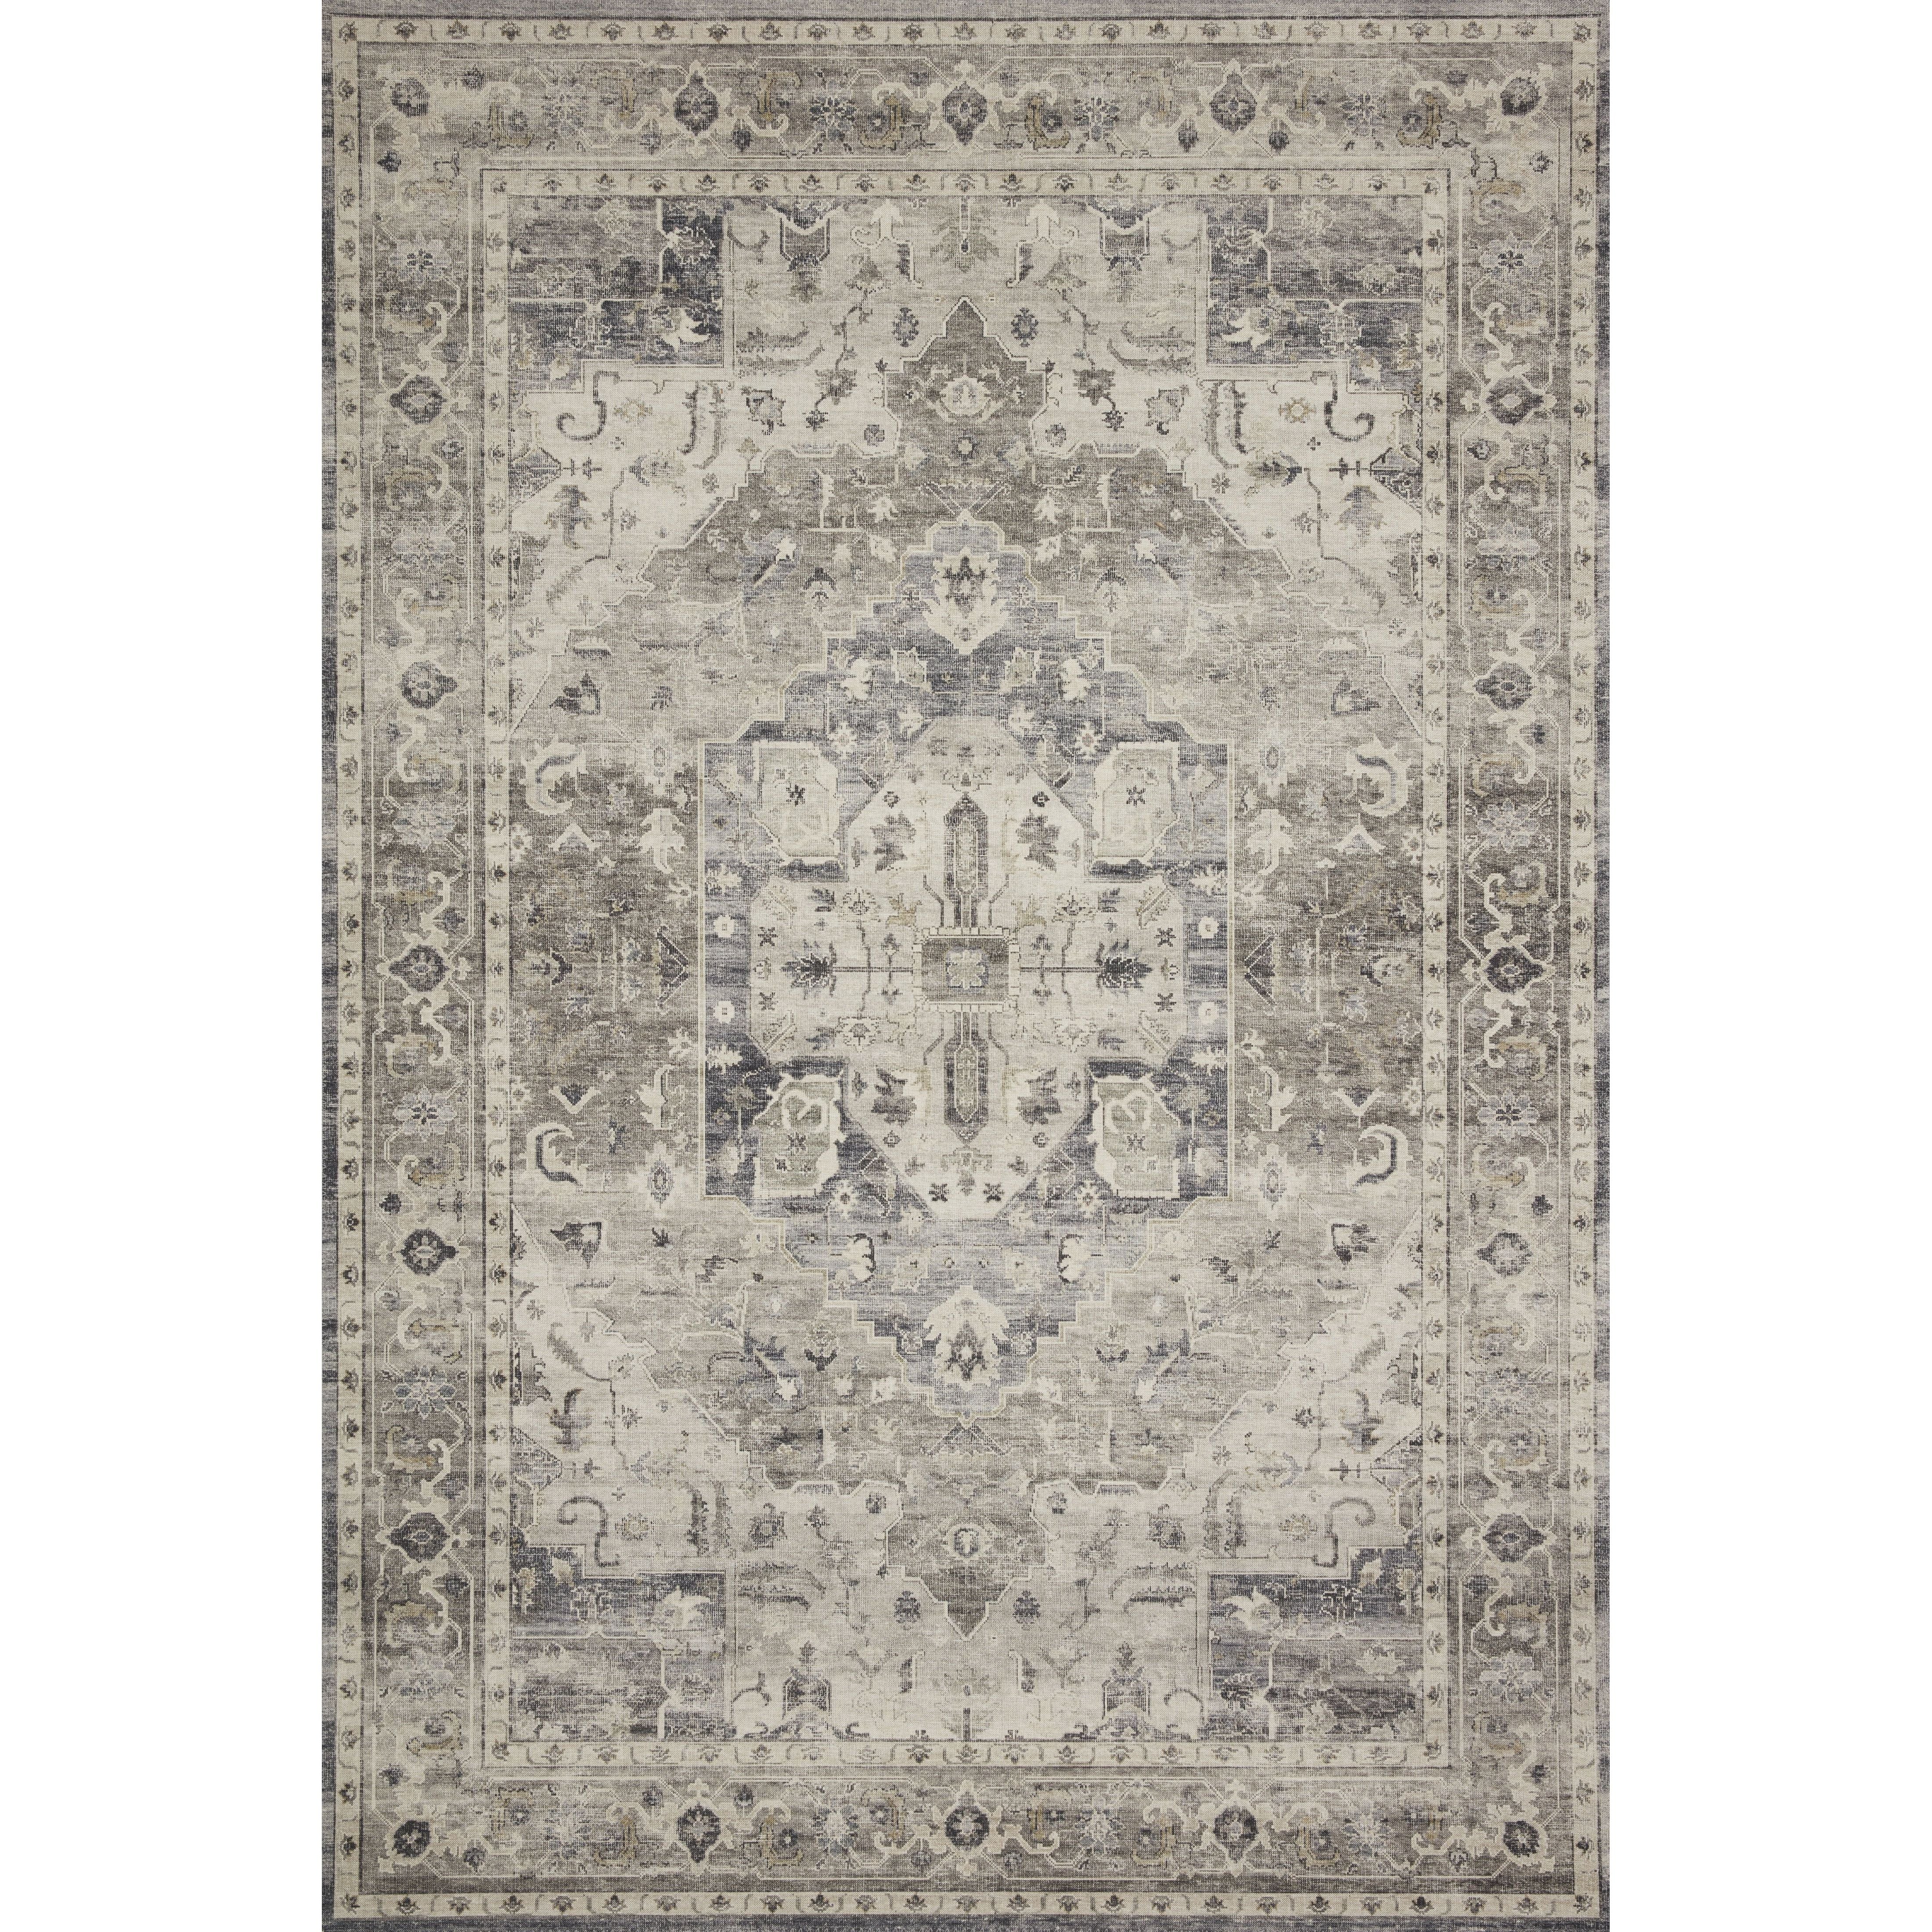 Featuring soft motifs in a carefully curated color palate of grey, black, ivory and hints of blue, the Hathaway Steel / Ivory area rug captures the essence of one-of-a-kind vintage or antique area rug. This rug is ideal for high traffic areas such as living rooms, dining rooms, kitchens, hallways, and entryways.